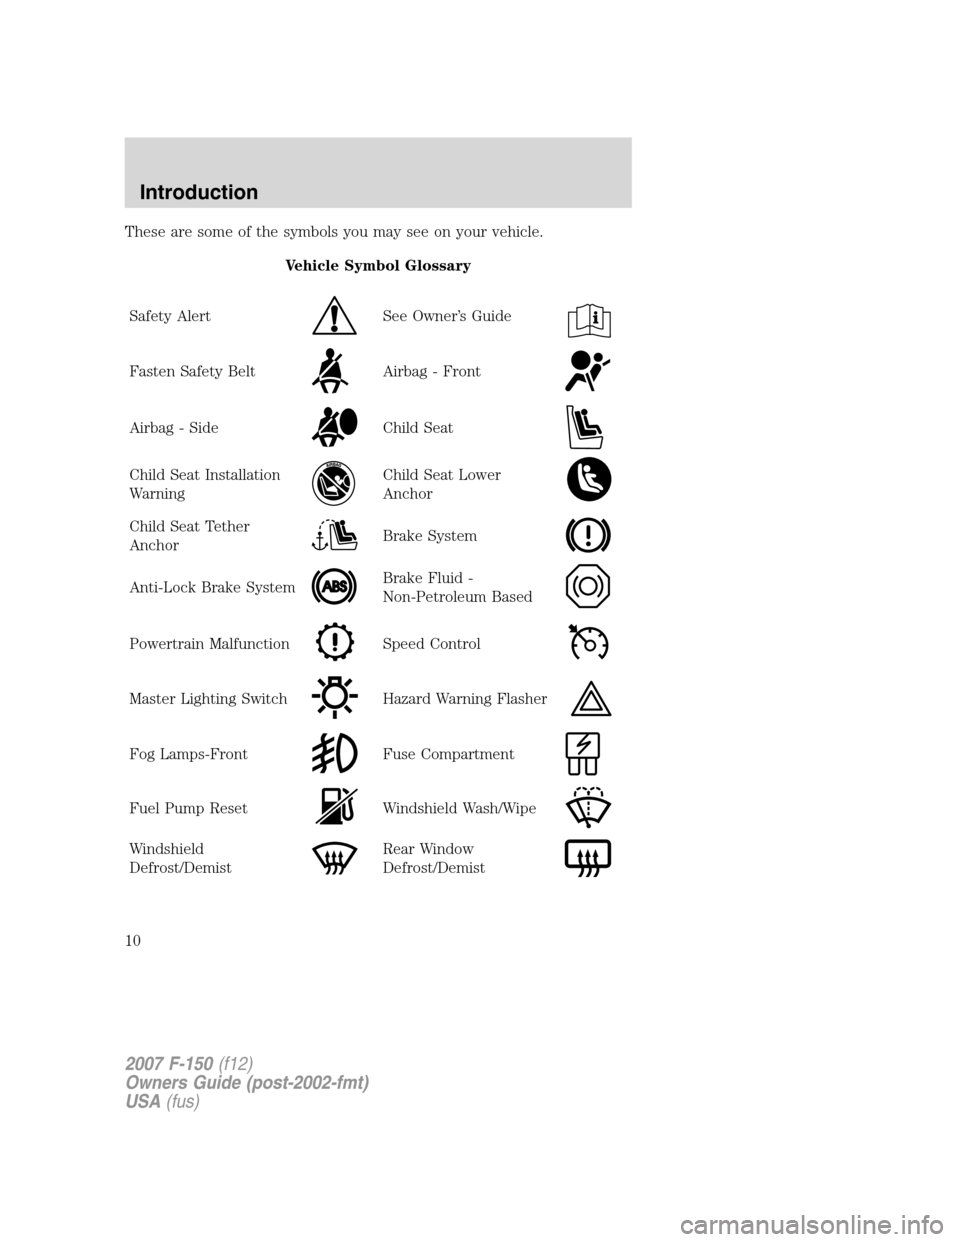 FORD F150 2007 11.G Owners Manual These are some of the symbols you may see on your vehicle.
Vehicle Symbol Glossary
Safety Alert
See Owner’s Guide
Fasten Safety BeltAirbag - Front
Airbag - SideChild Seat
Child Seat Installation
War